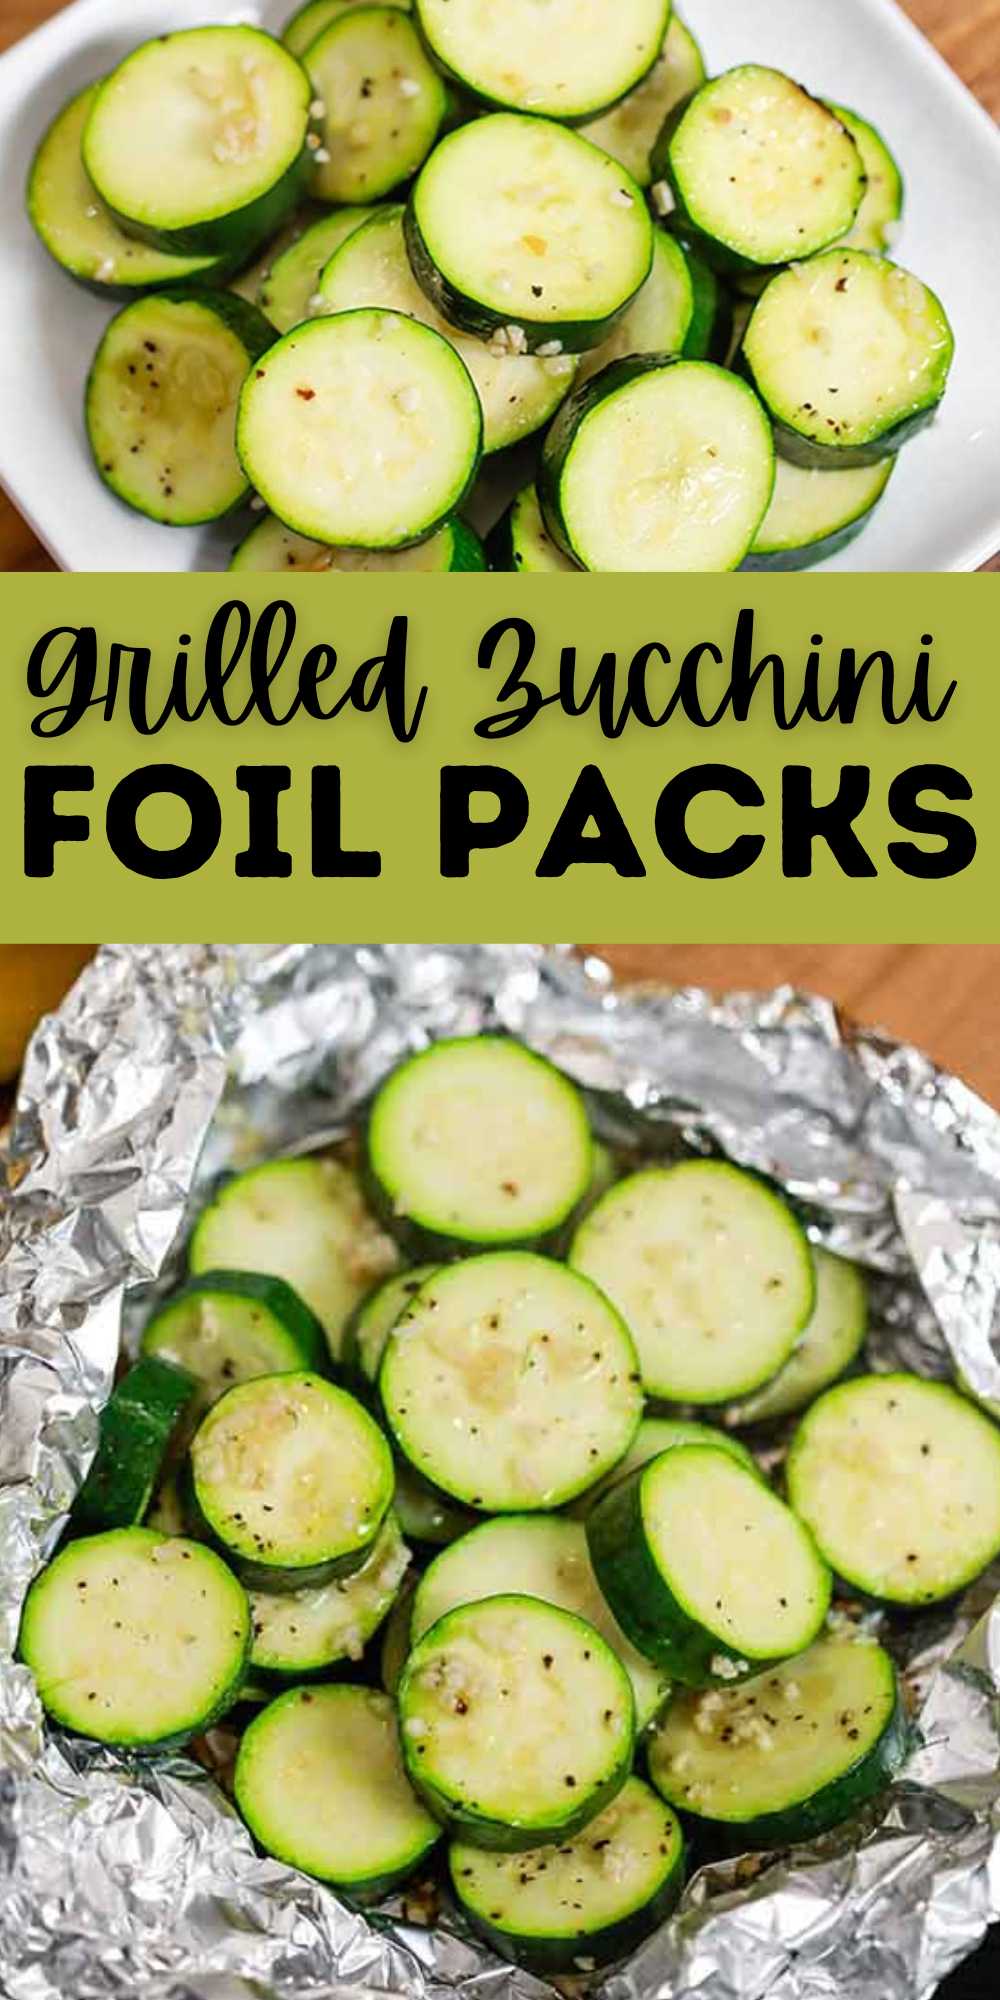 Grilled Zucchini Foil Pack Recipe is an easy side dish and clean up is a breeze. The veggies have the best flavor from the grill. This summer squash is the perfect summer side dish. Whenever we grill, we like to grill our side dishes. Zucchini goes well with grilled steaks, chicken or pork chops. #eatingonadime #grilledzucchinifoilpacks #foilpackrecipes #grilledzucchini